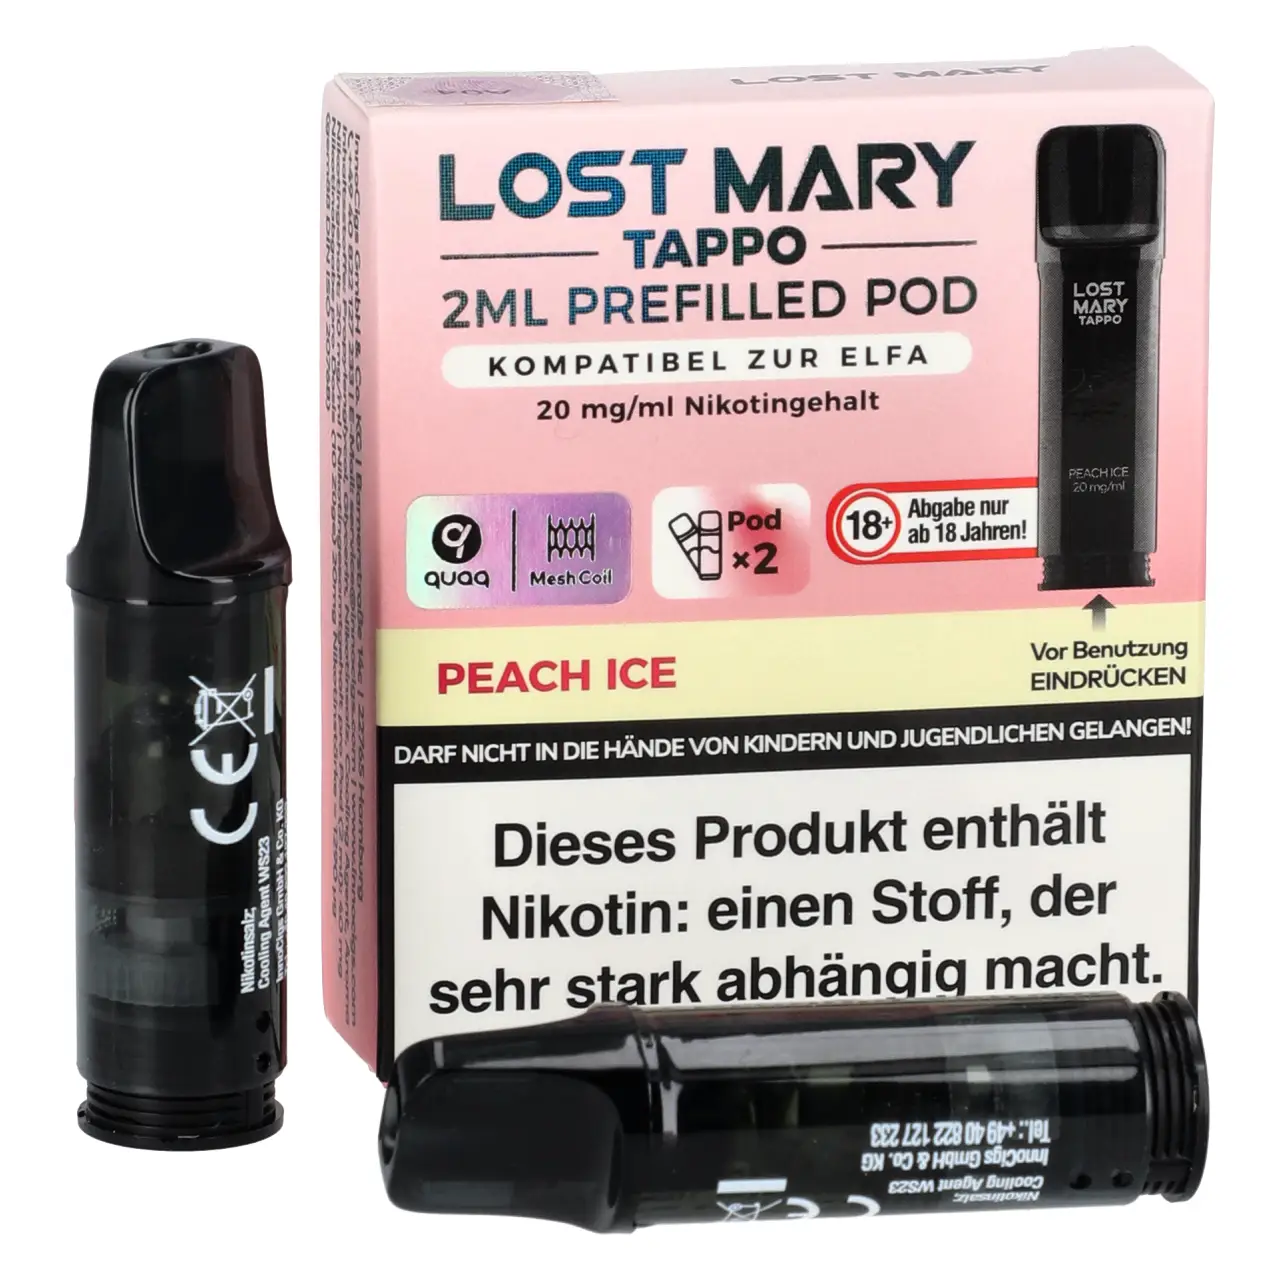 Lost Mary Tappo Prefilled Pod - Peach Ice - 2er Packung